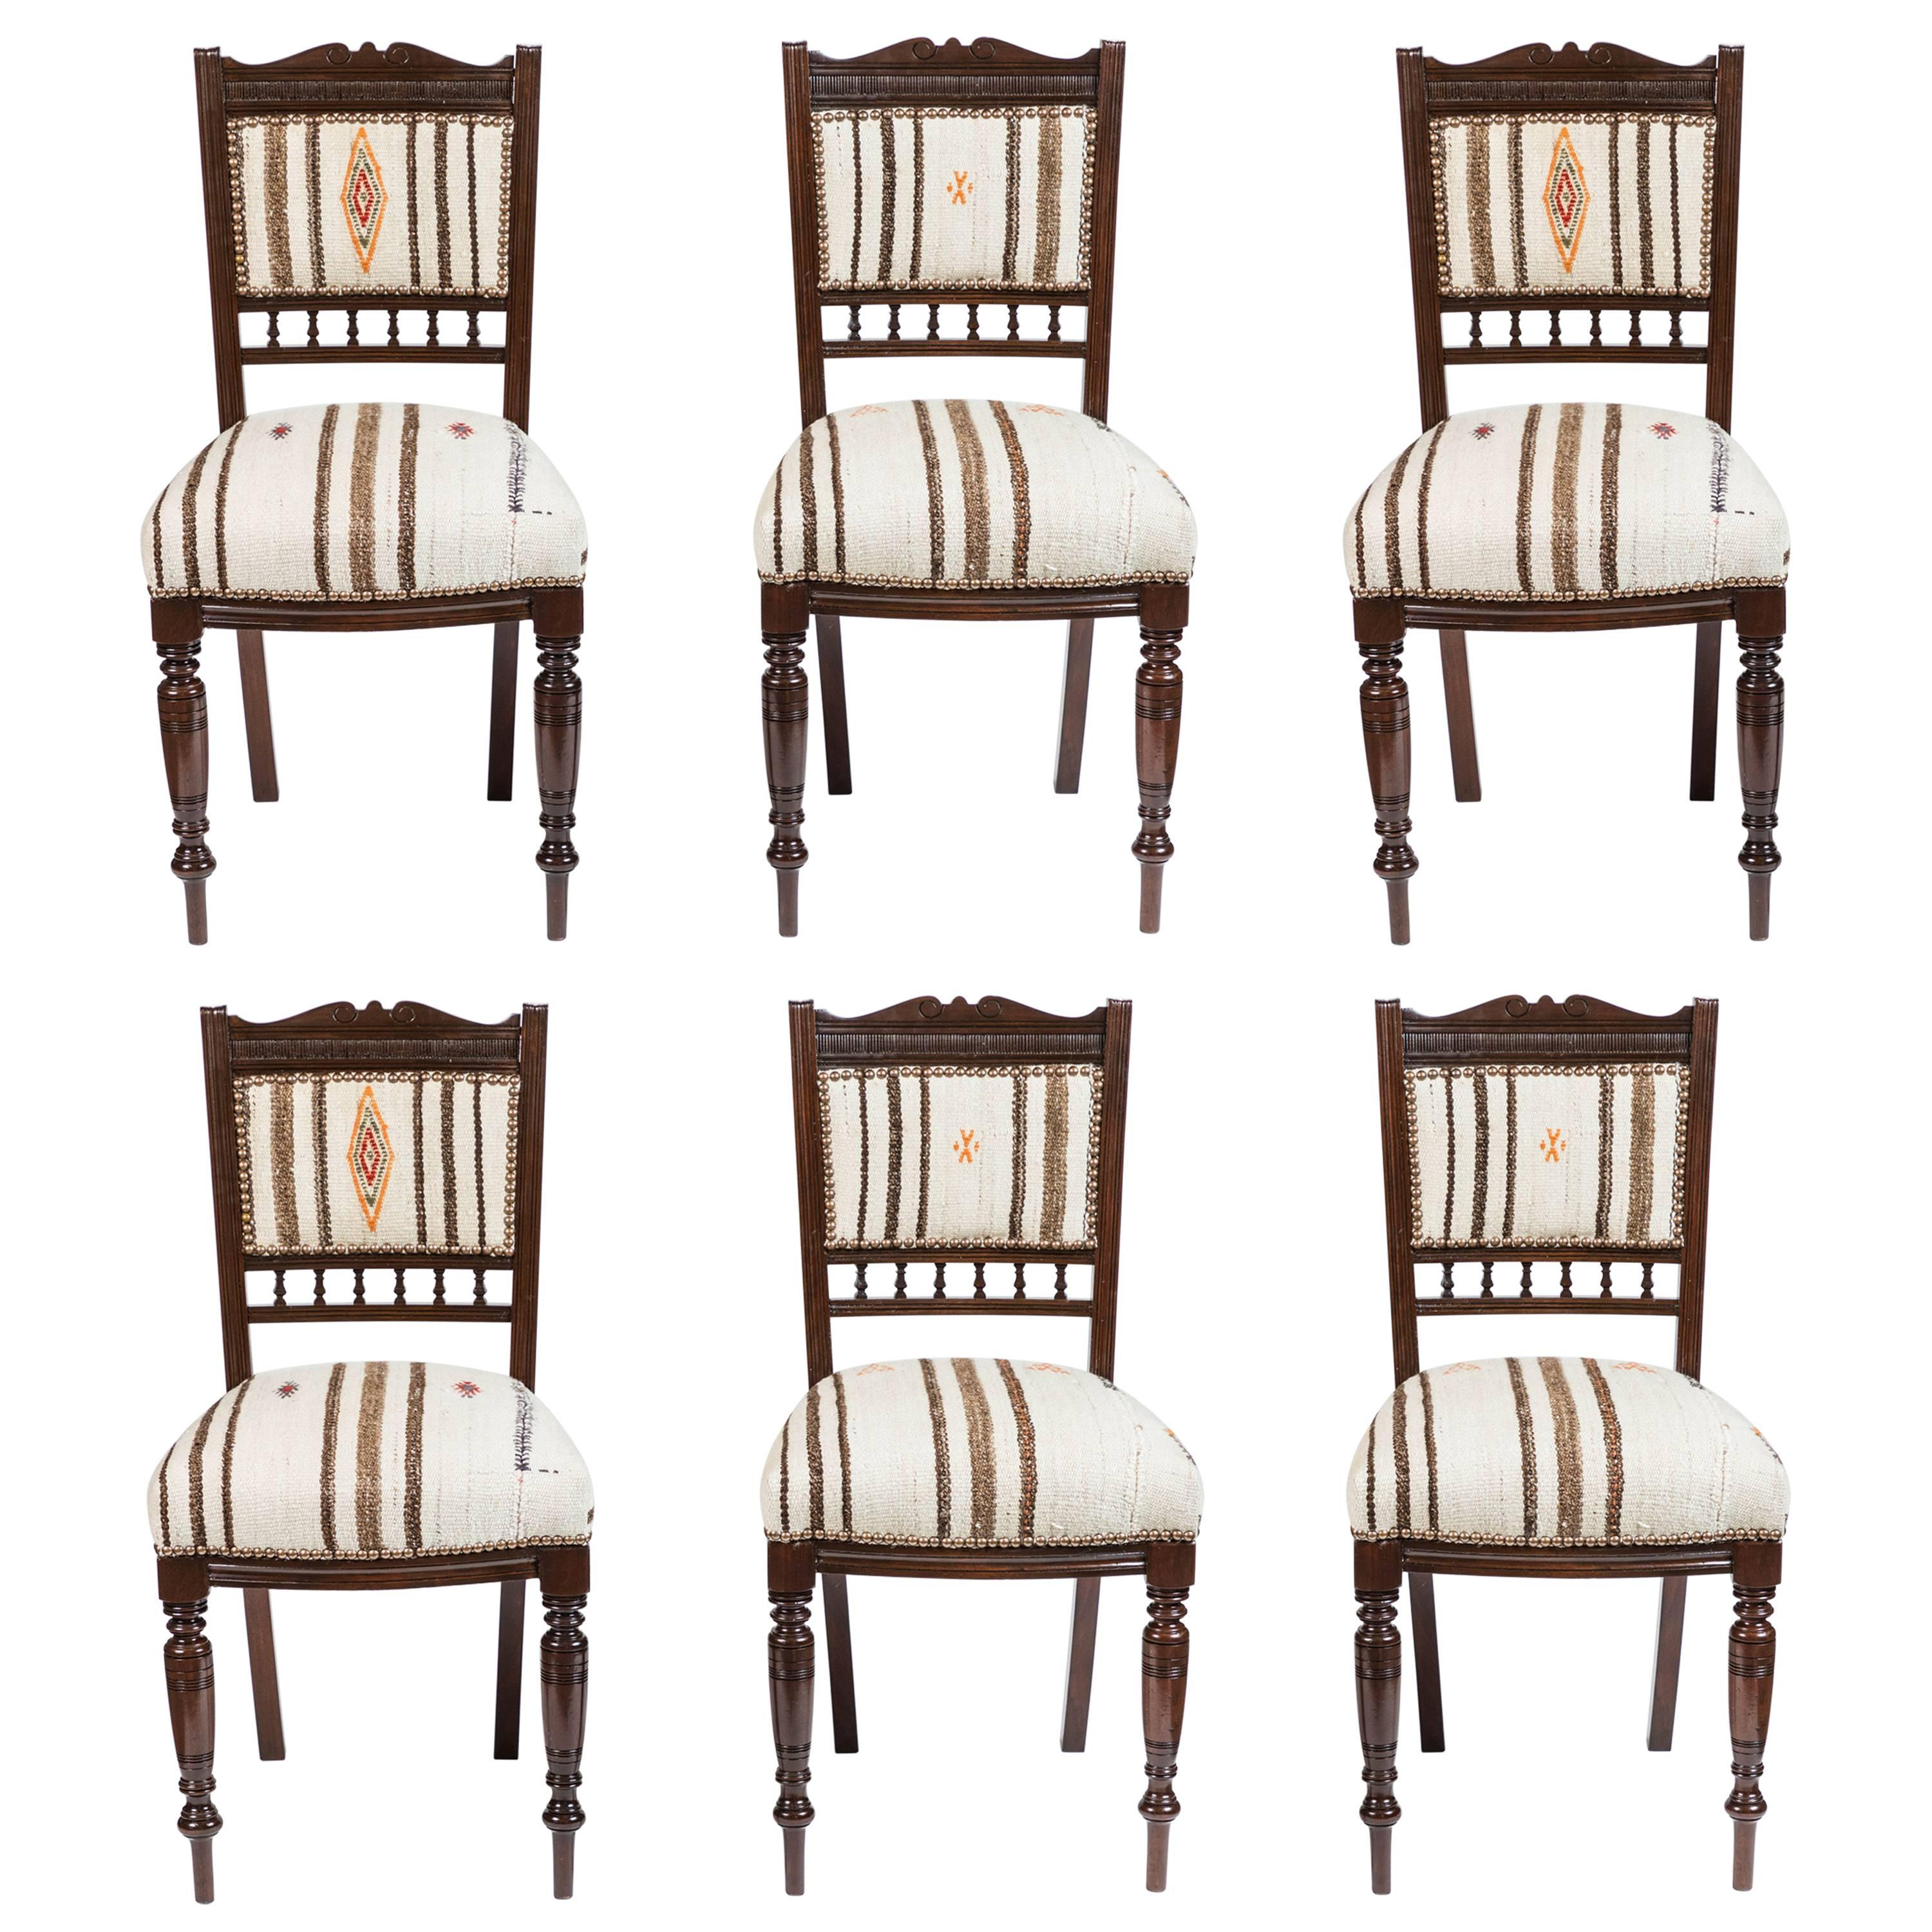 Set of Six Vintage Dining Chairs in Turkish Rug